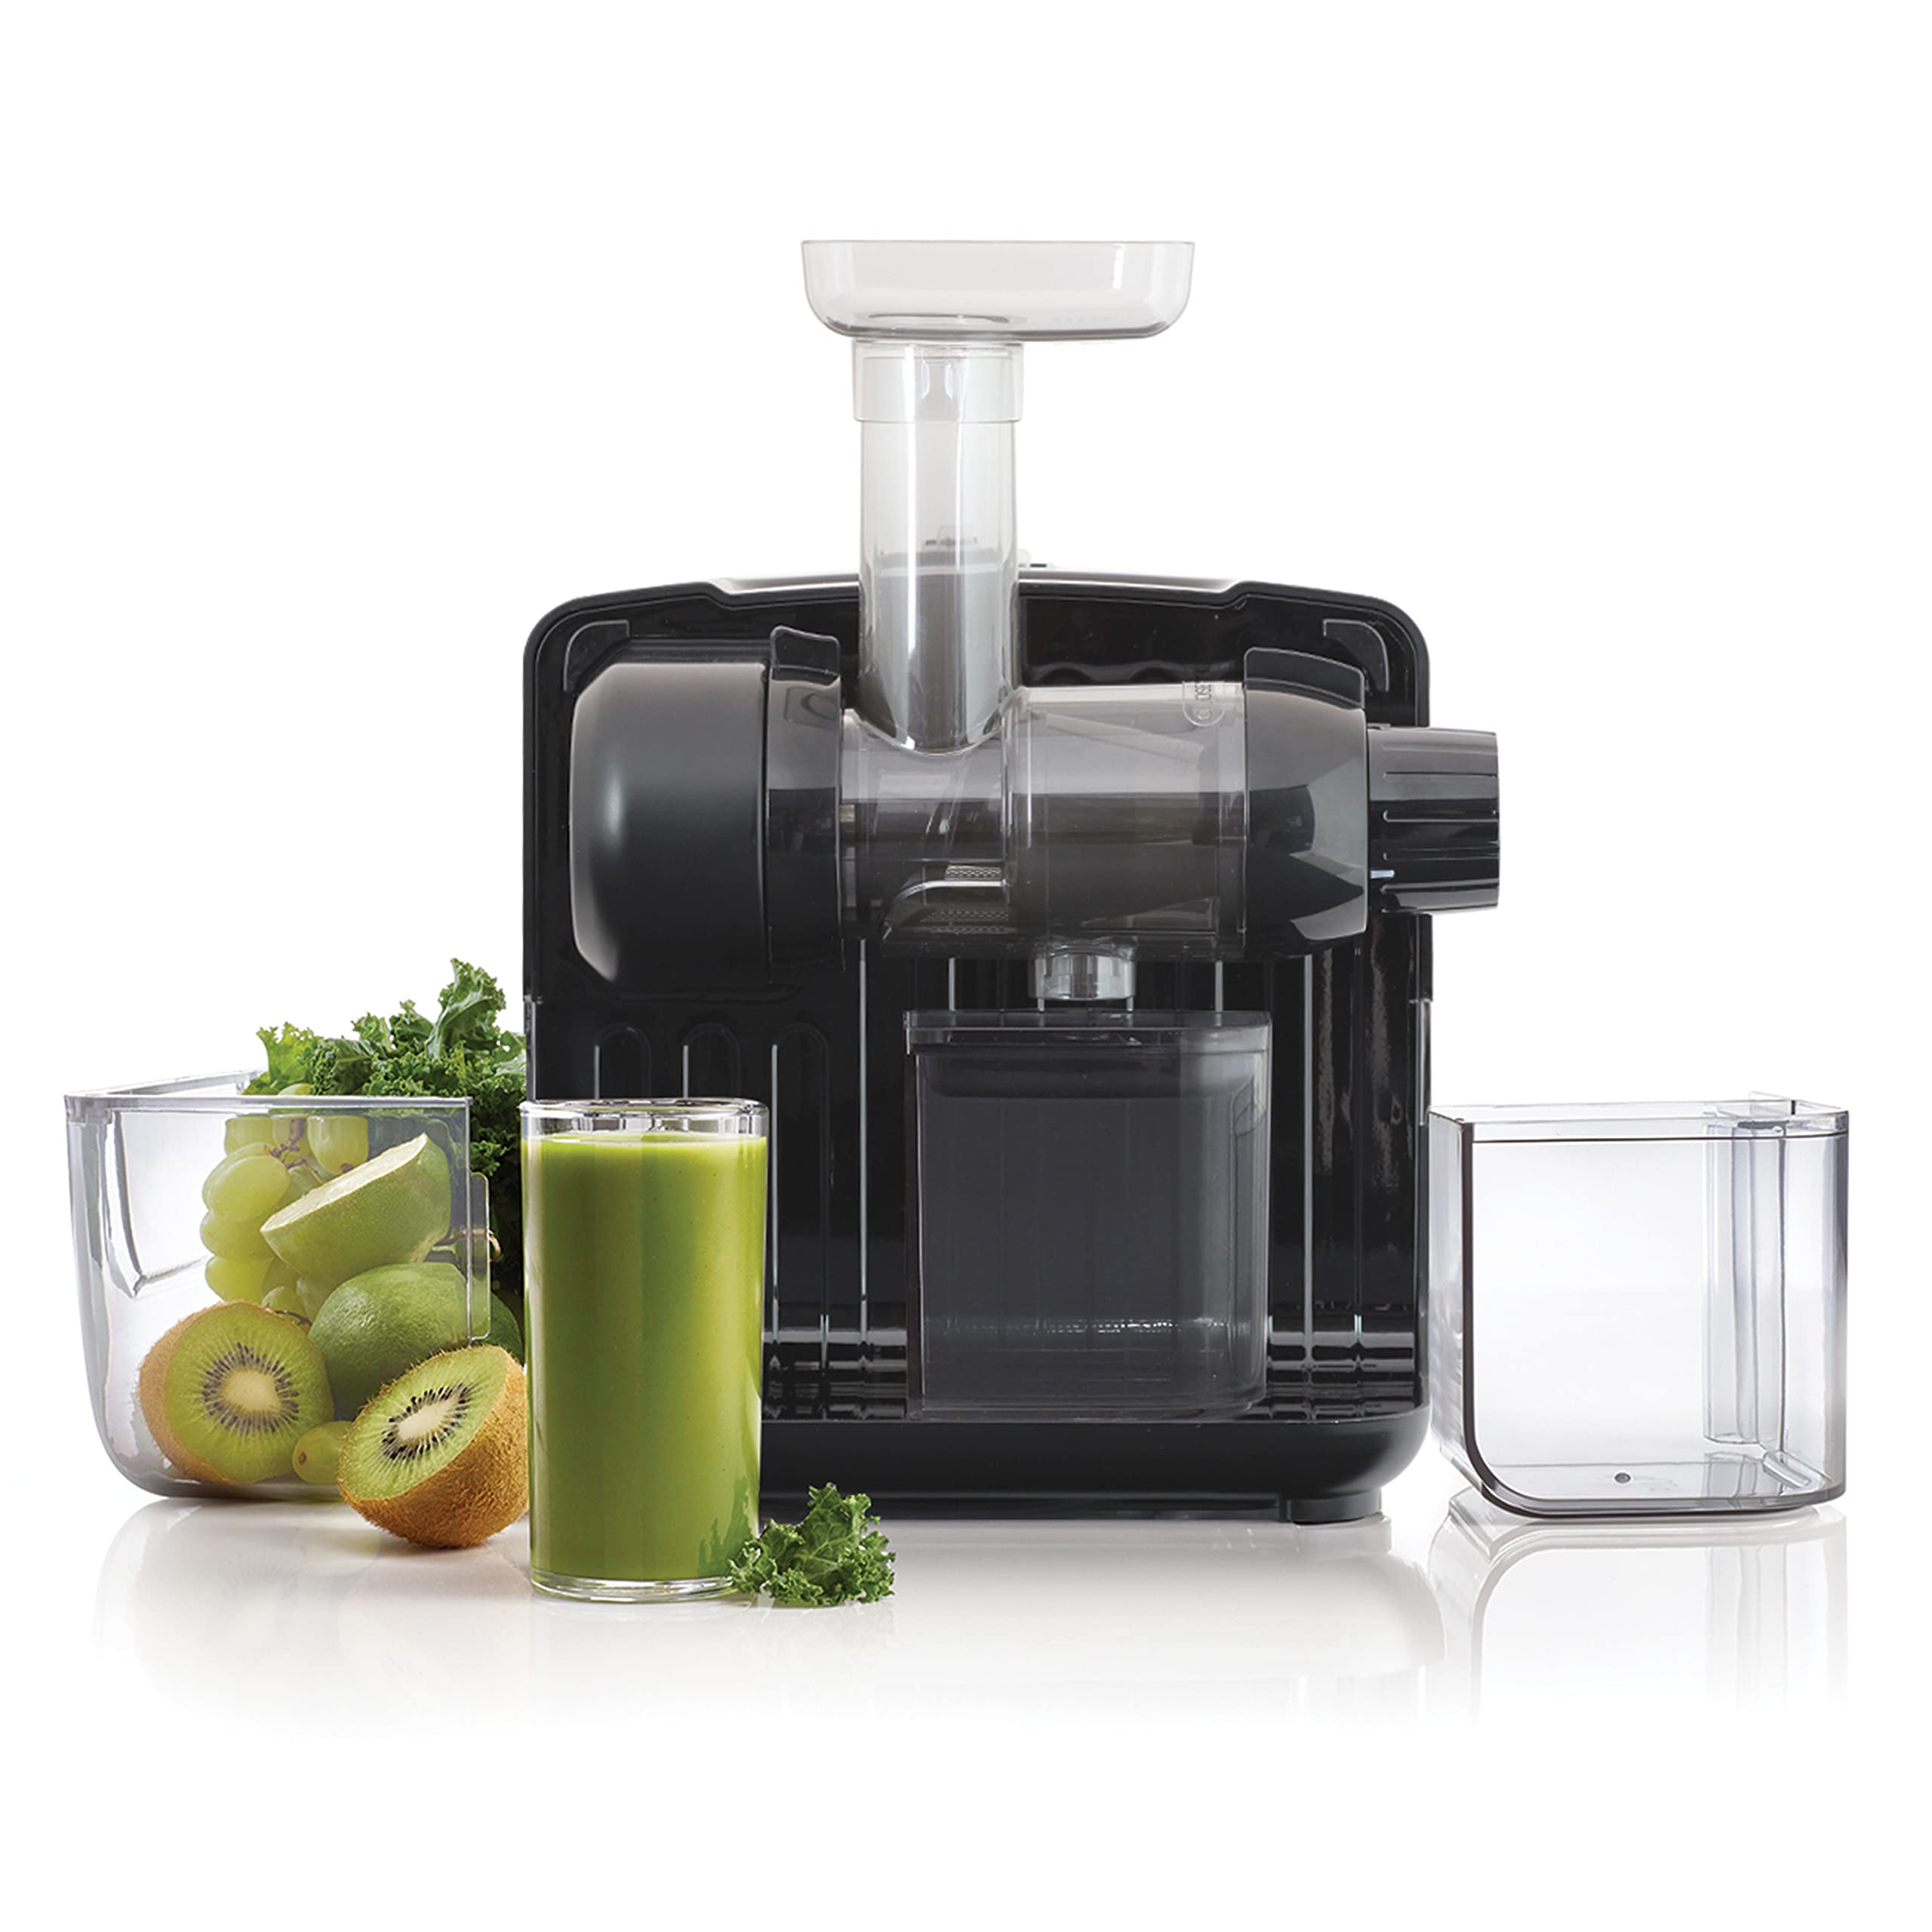 Omega Juicer JCUBE2MB13 Cold Press 365 Slow Masticating Juice Extractor and Nutrition System with On-Board Storage, 120-Watts, Black